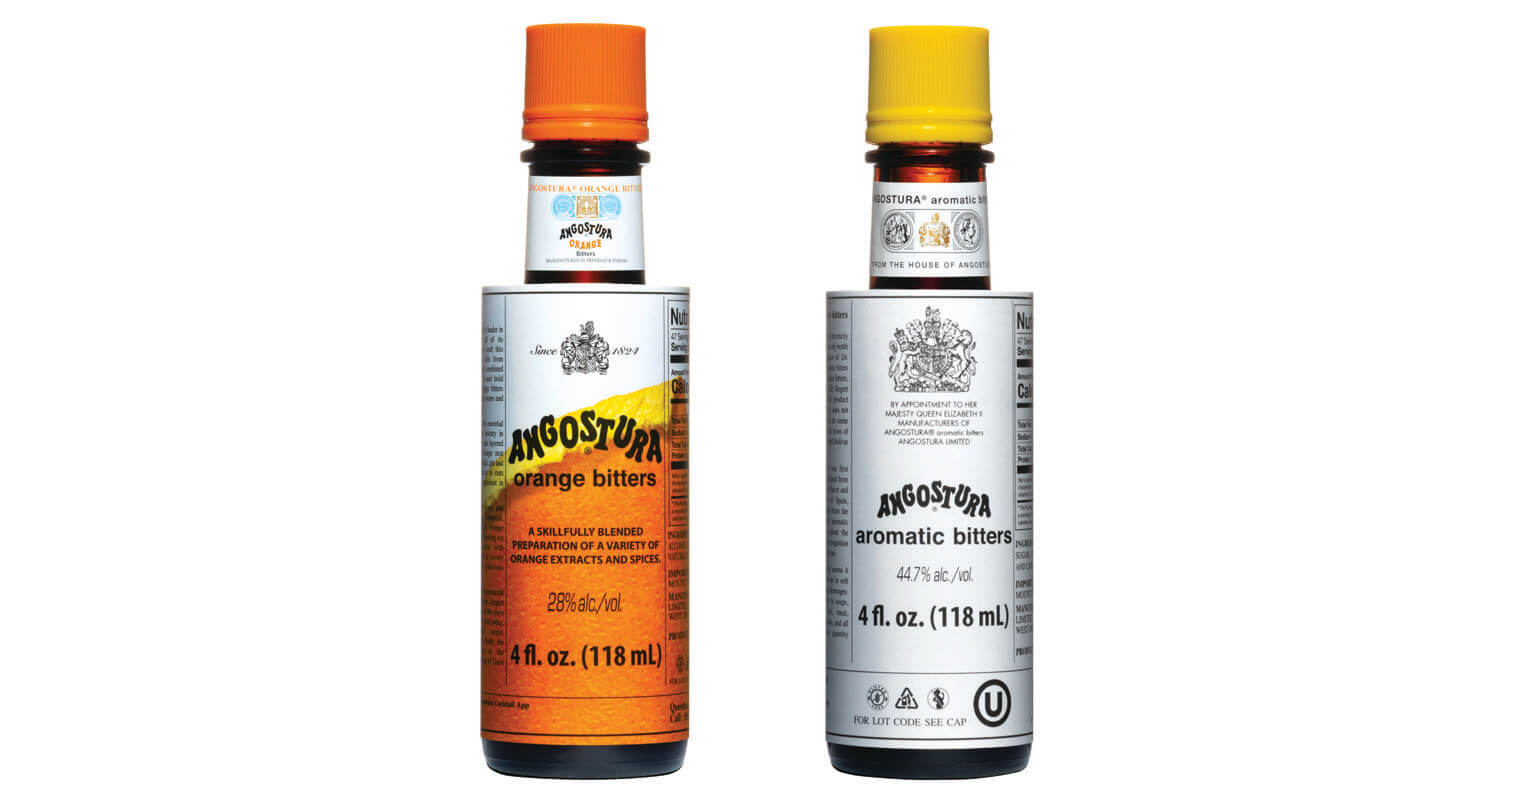 ANGOSTURA bitters, bottles on white featured image